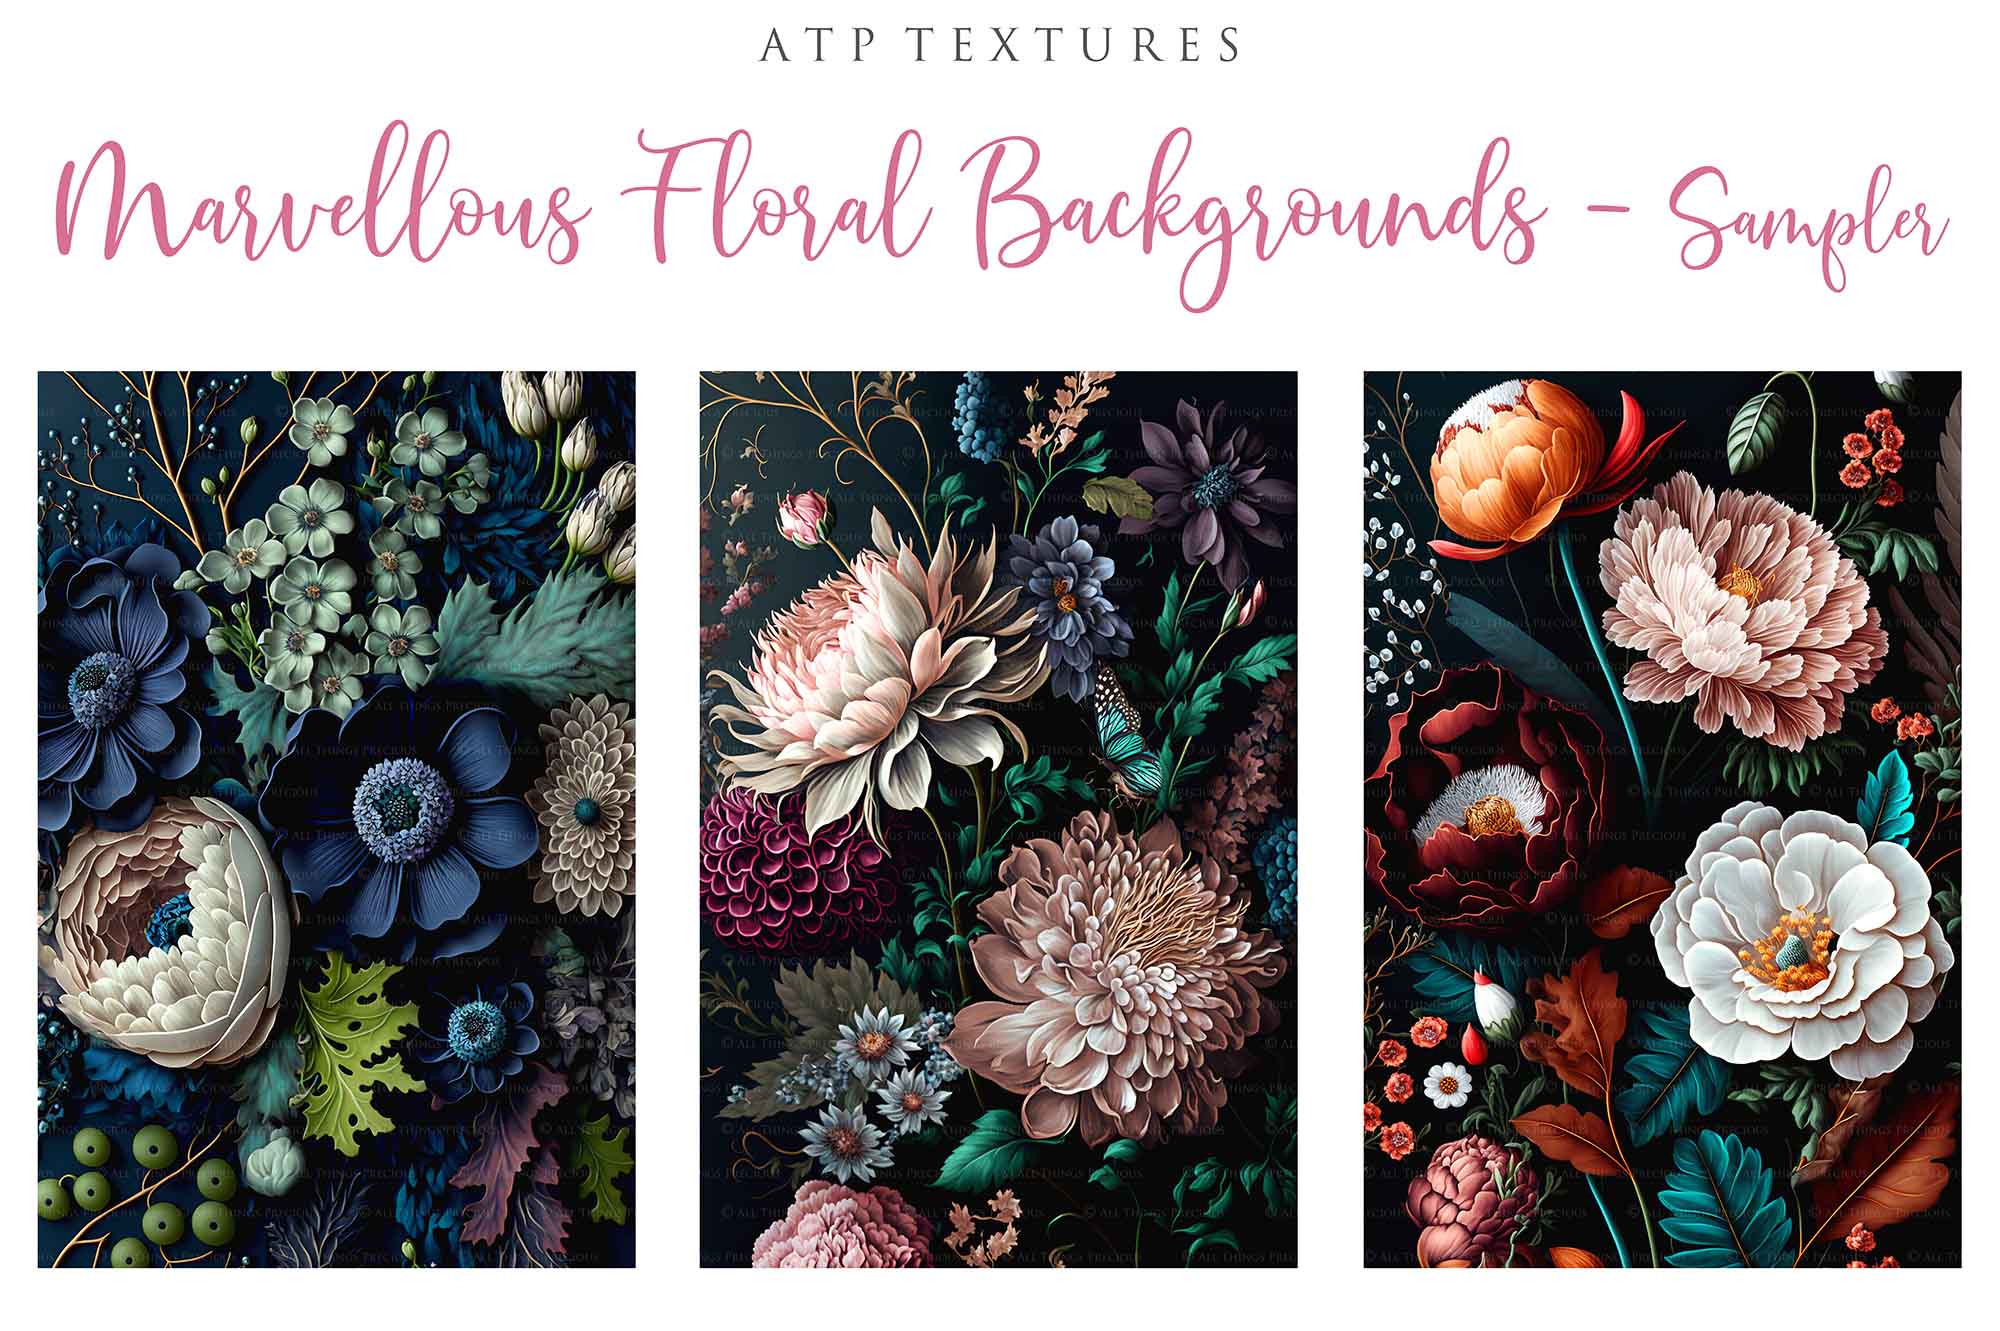 Floral Background in High resolution. For Digital scrapbooking, Print, Photoshop and Photography. Backdrop bundle. Digital, 300dpi, jpeg files for print. rich coloured flowers on a dark background.